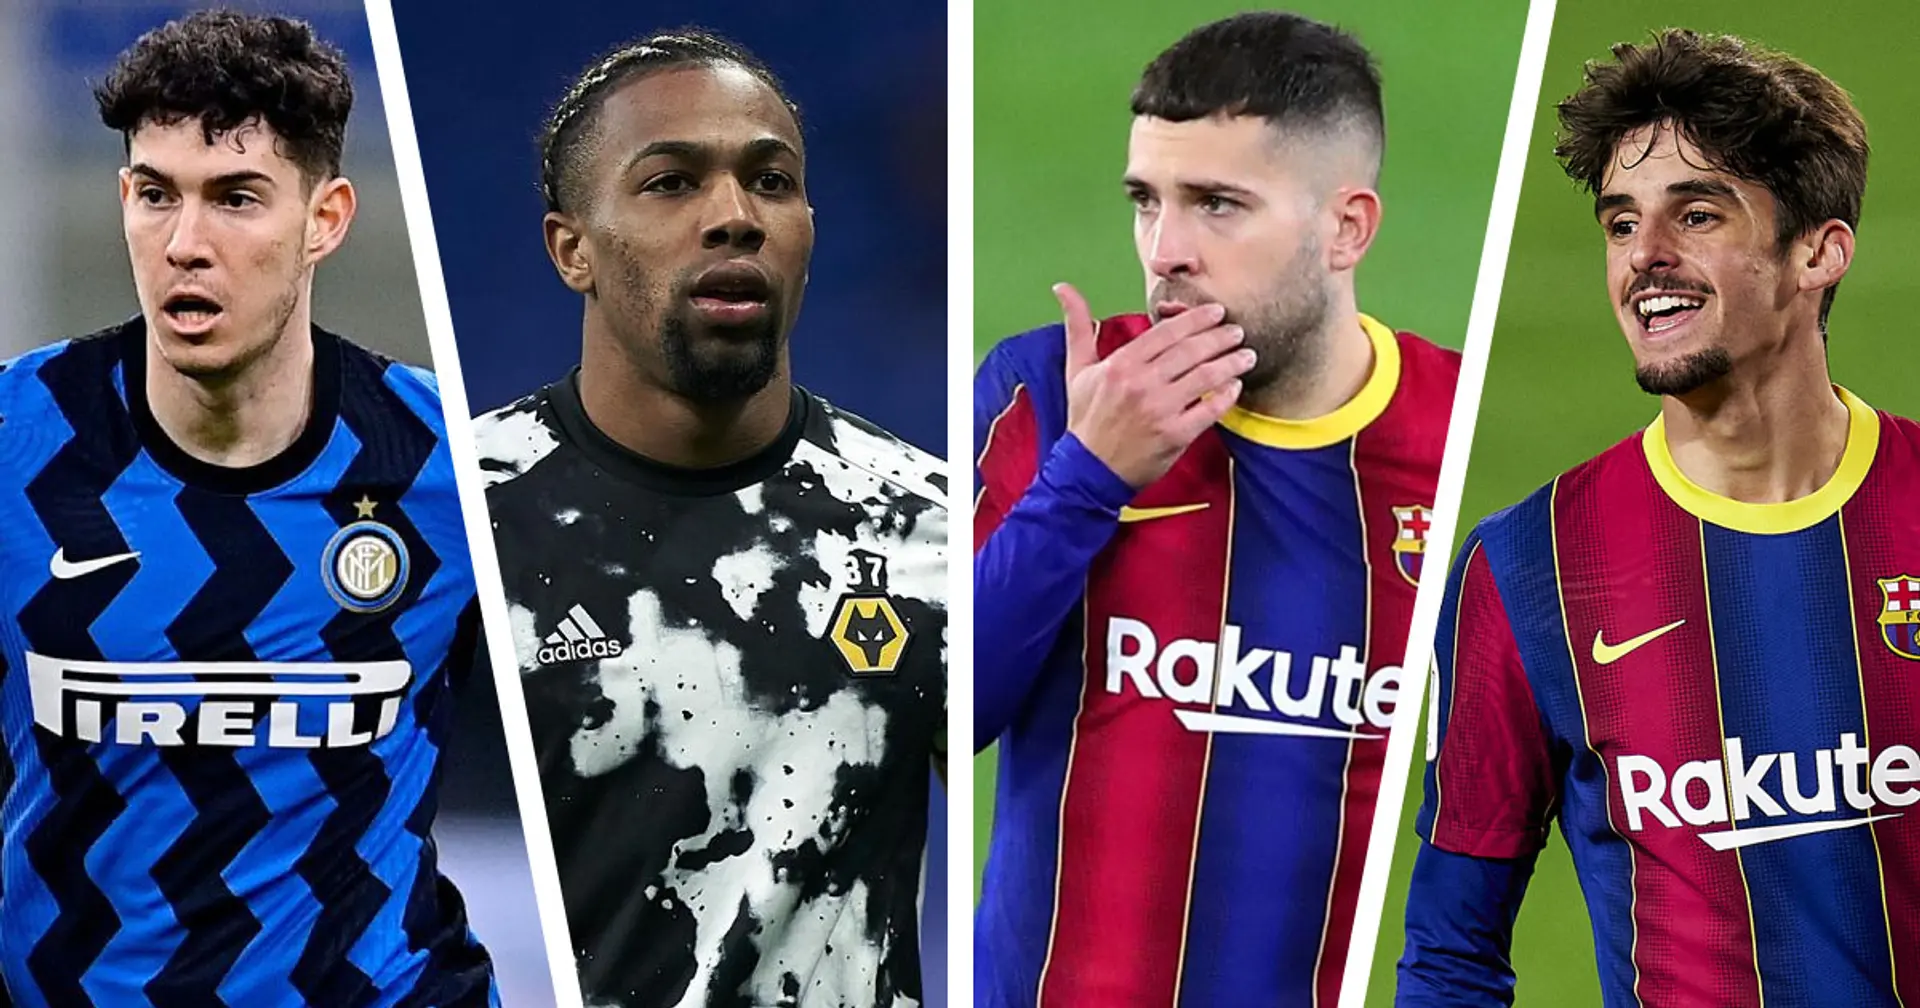 Adama in, Alba out: 13-name transfer round-up at Barca with probability ratings